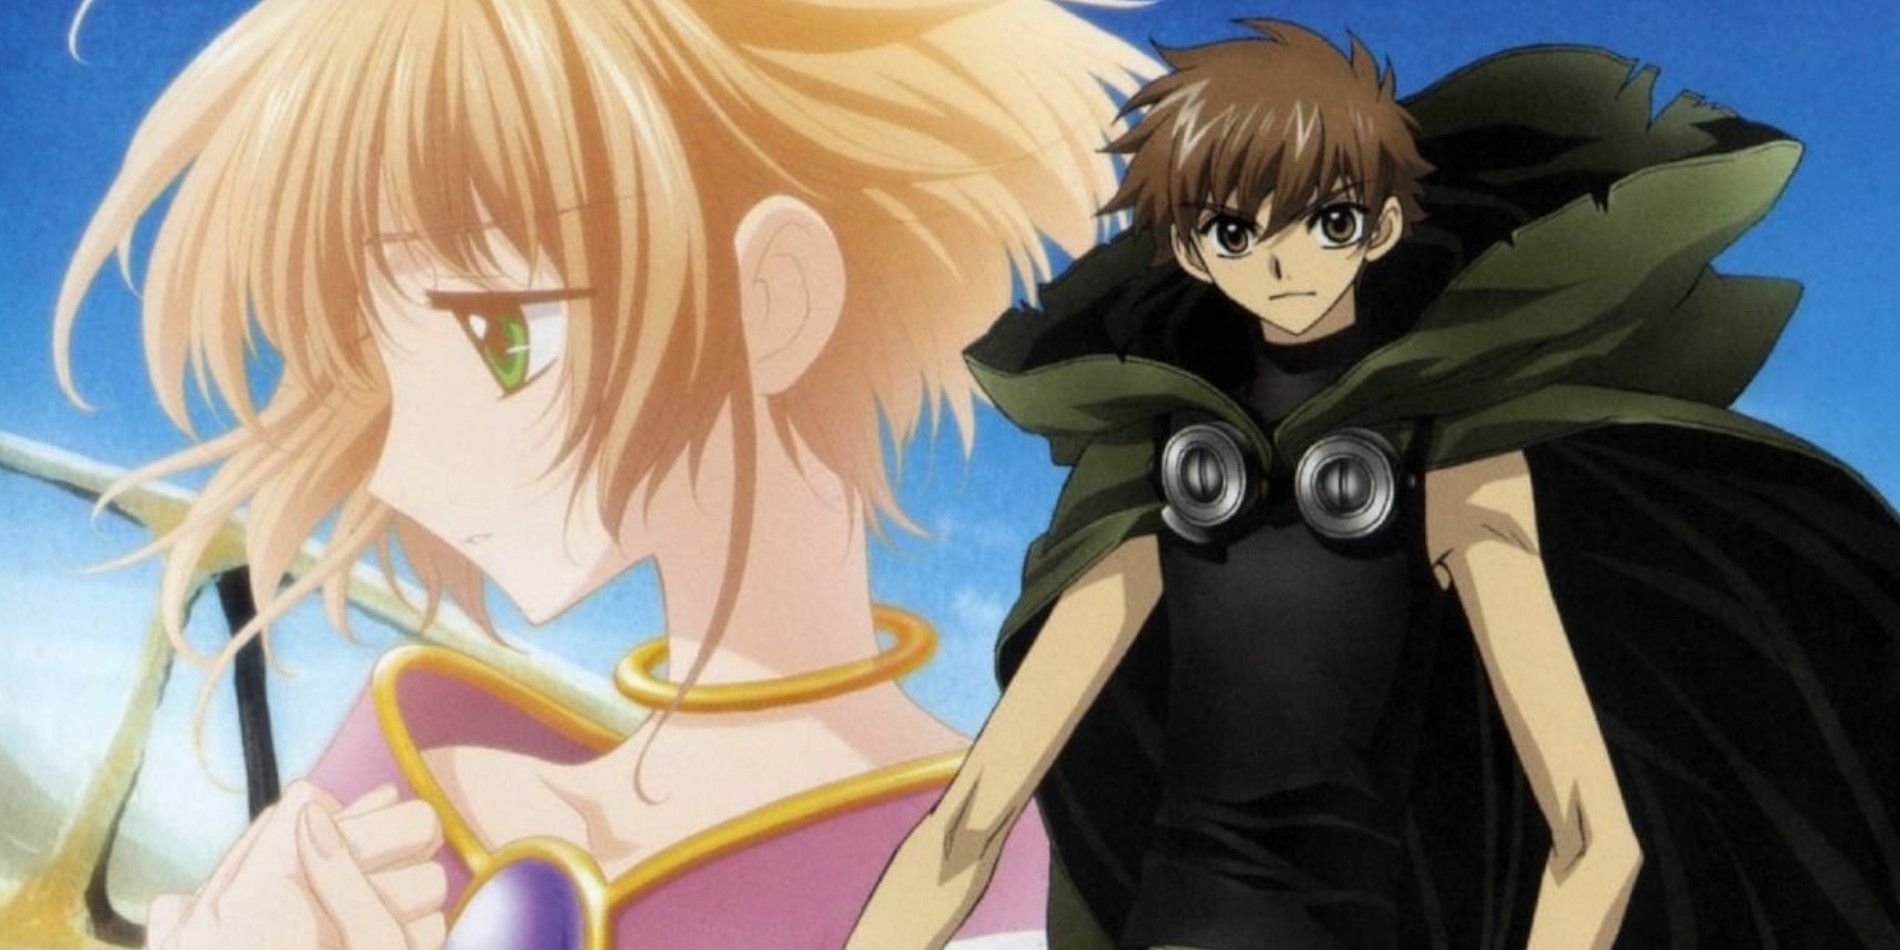 Tsubasa Reservoir Chronicle: Why the Anime Petered Out